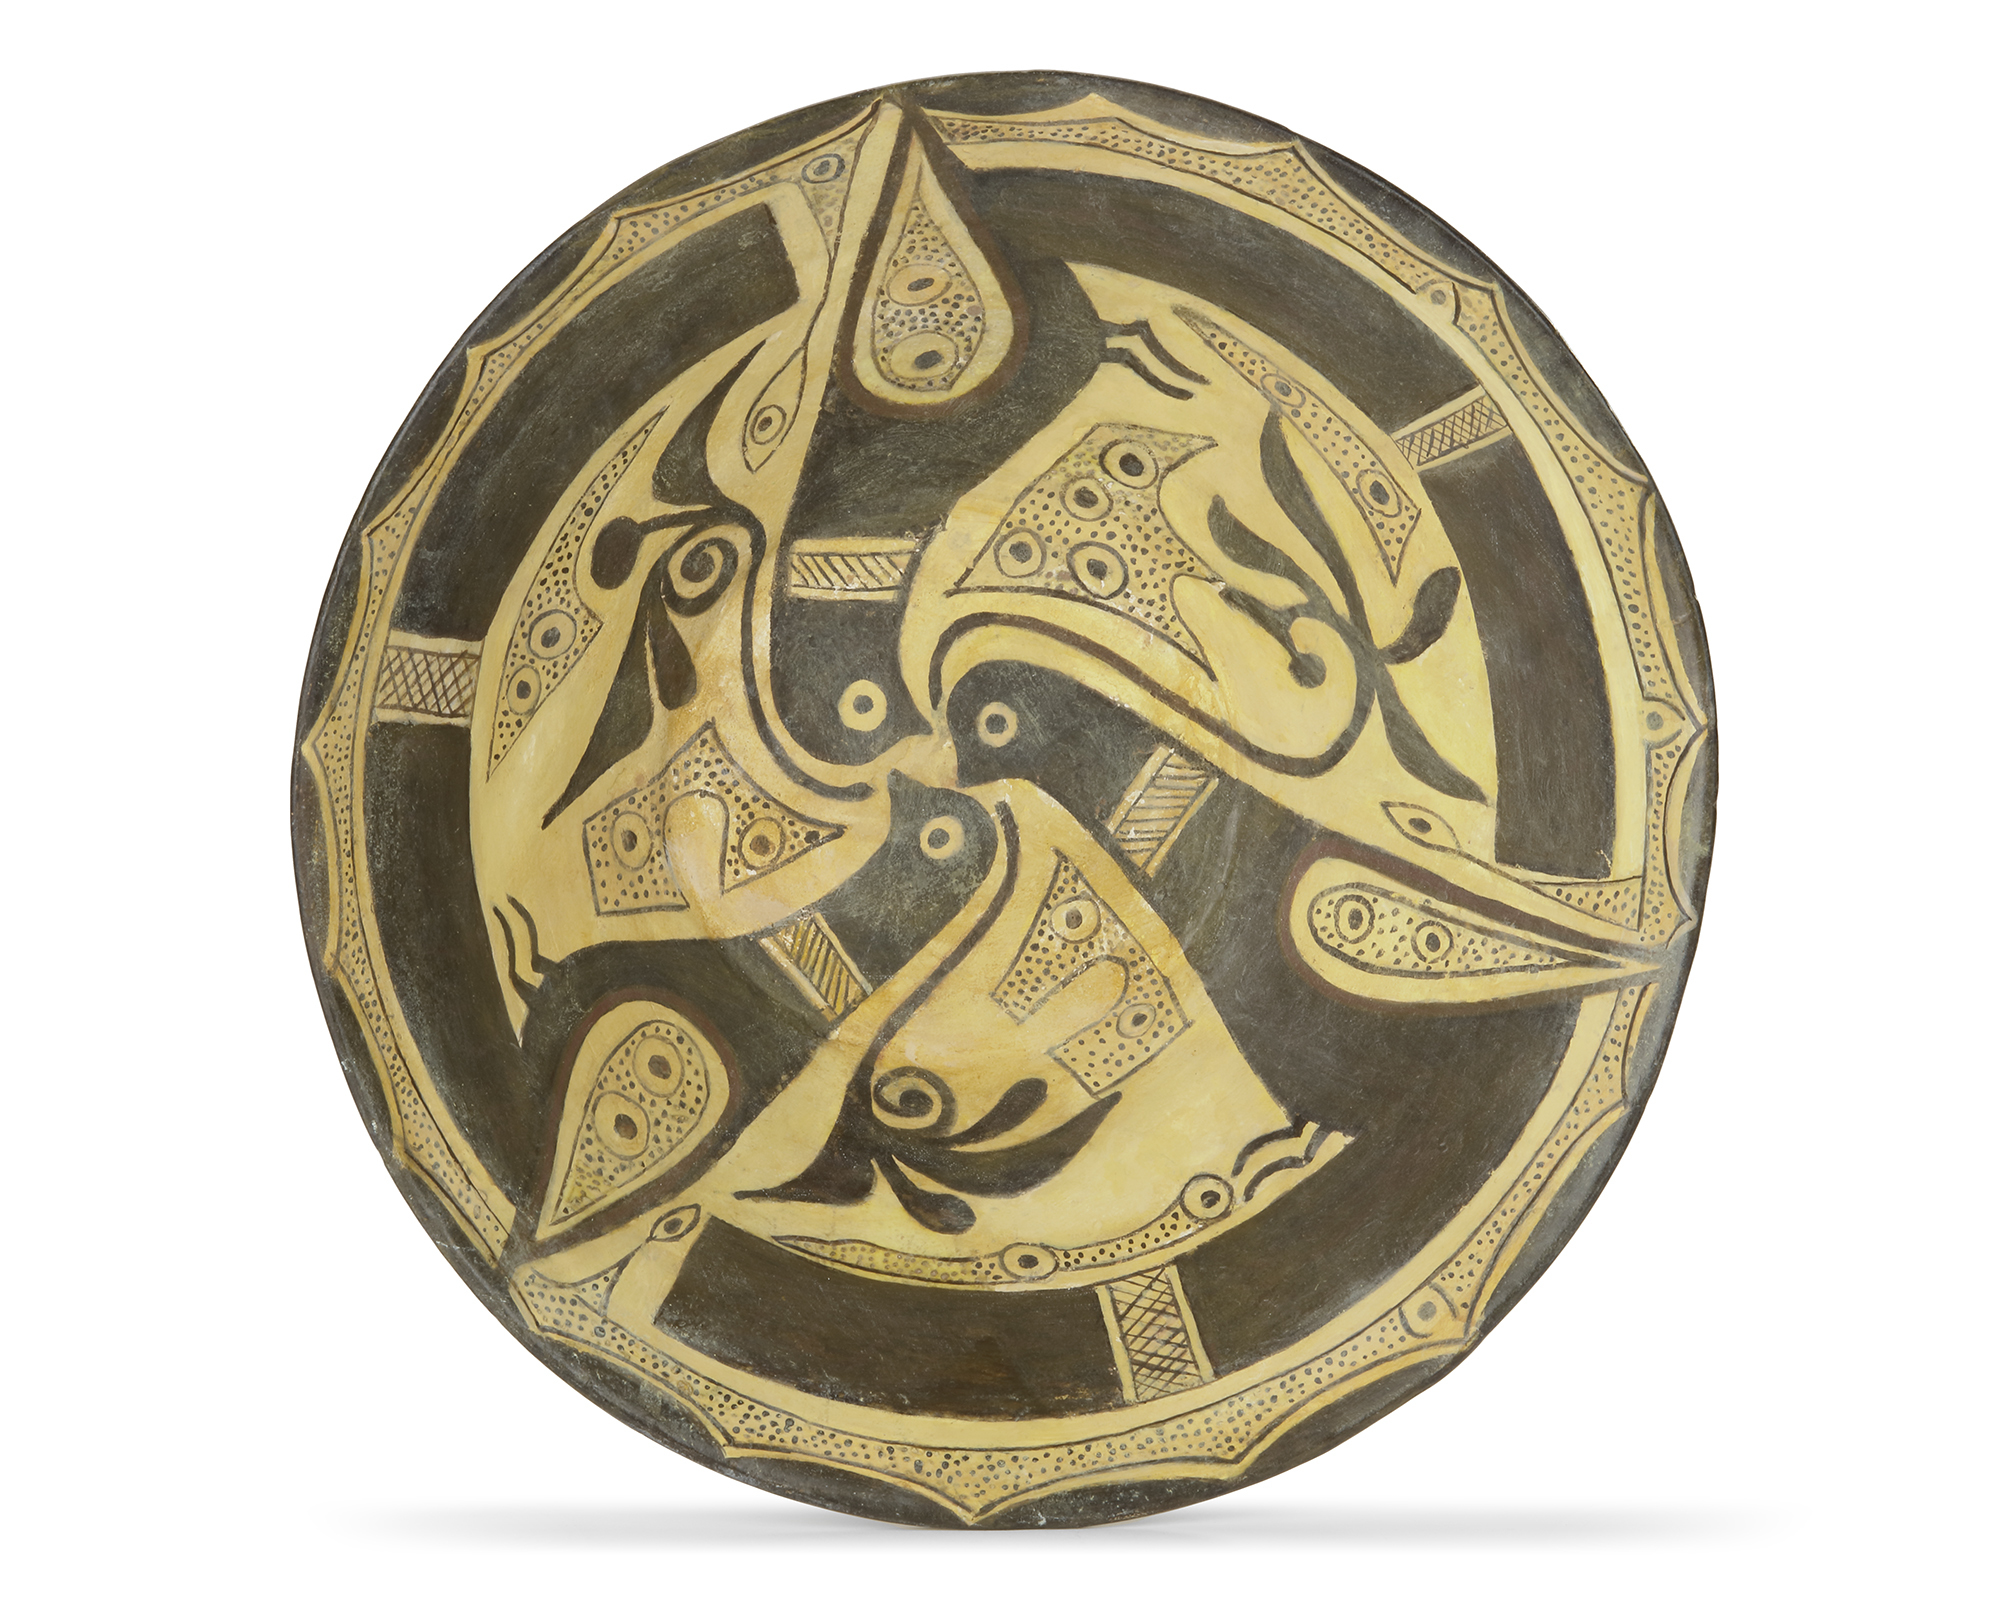 A NISHAPUR POTTERY BOWL, EASTERN PERSIA, 10TH CENTURY - Image 2 of 10